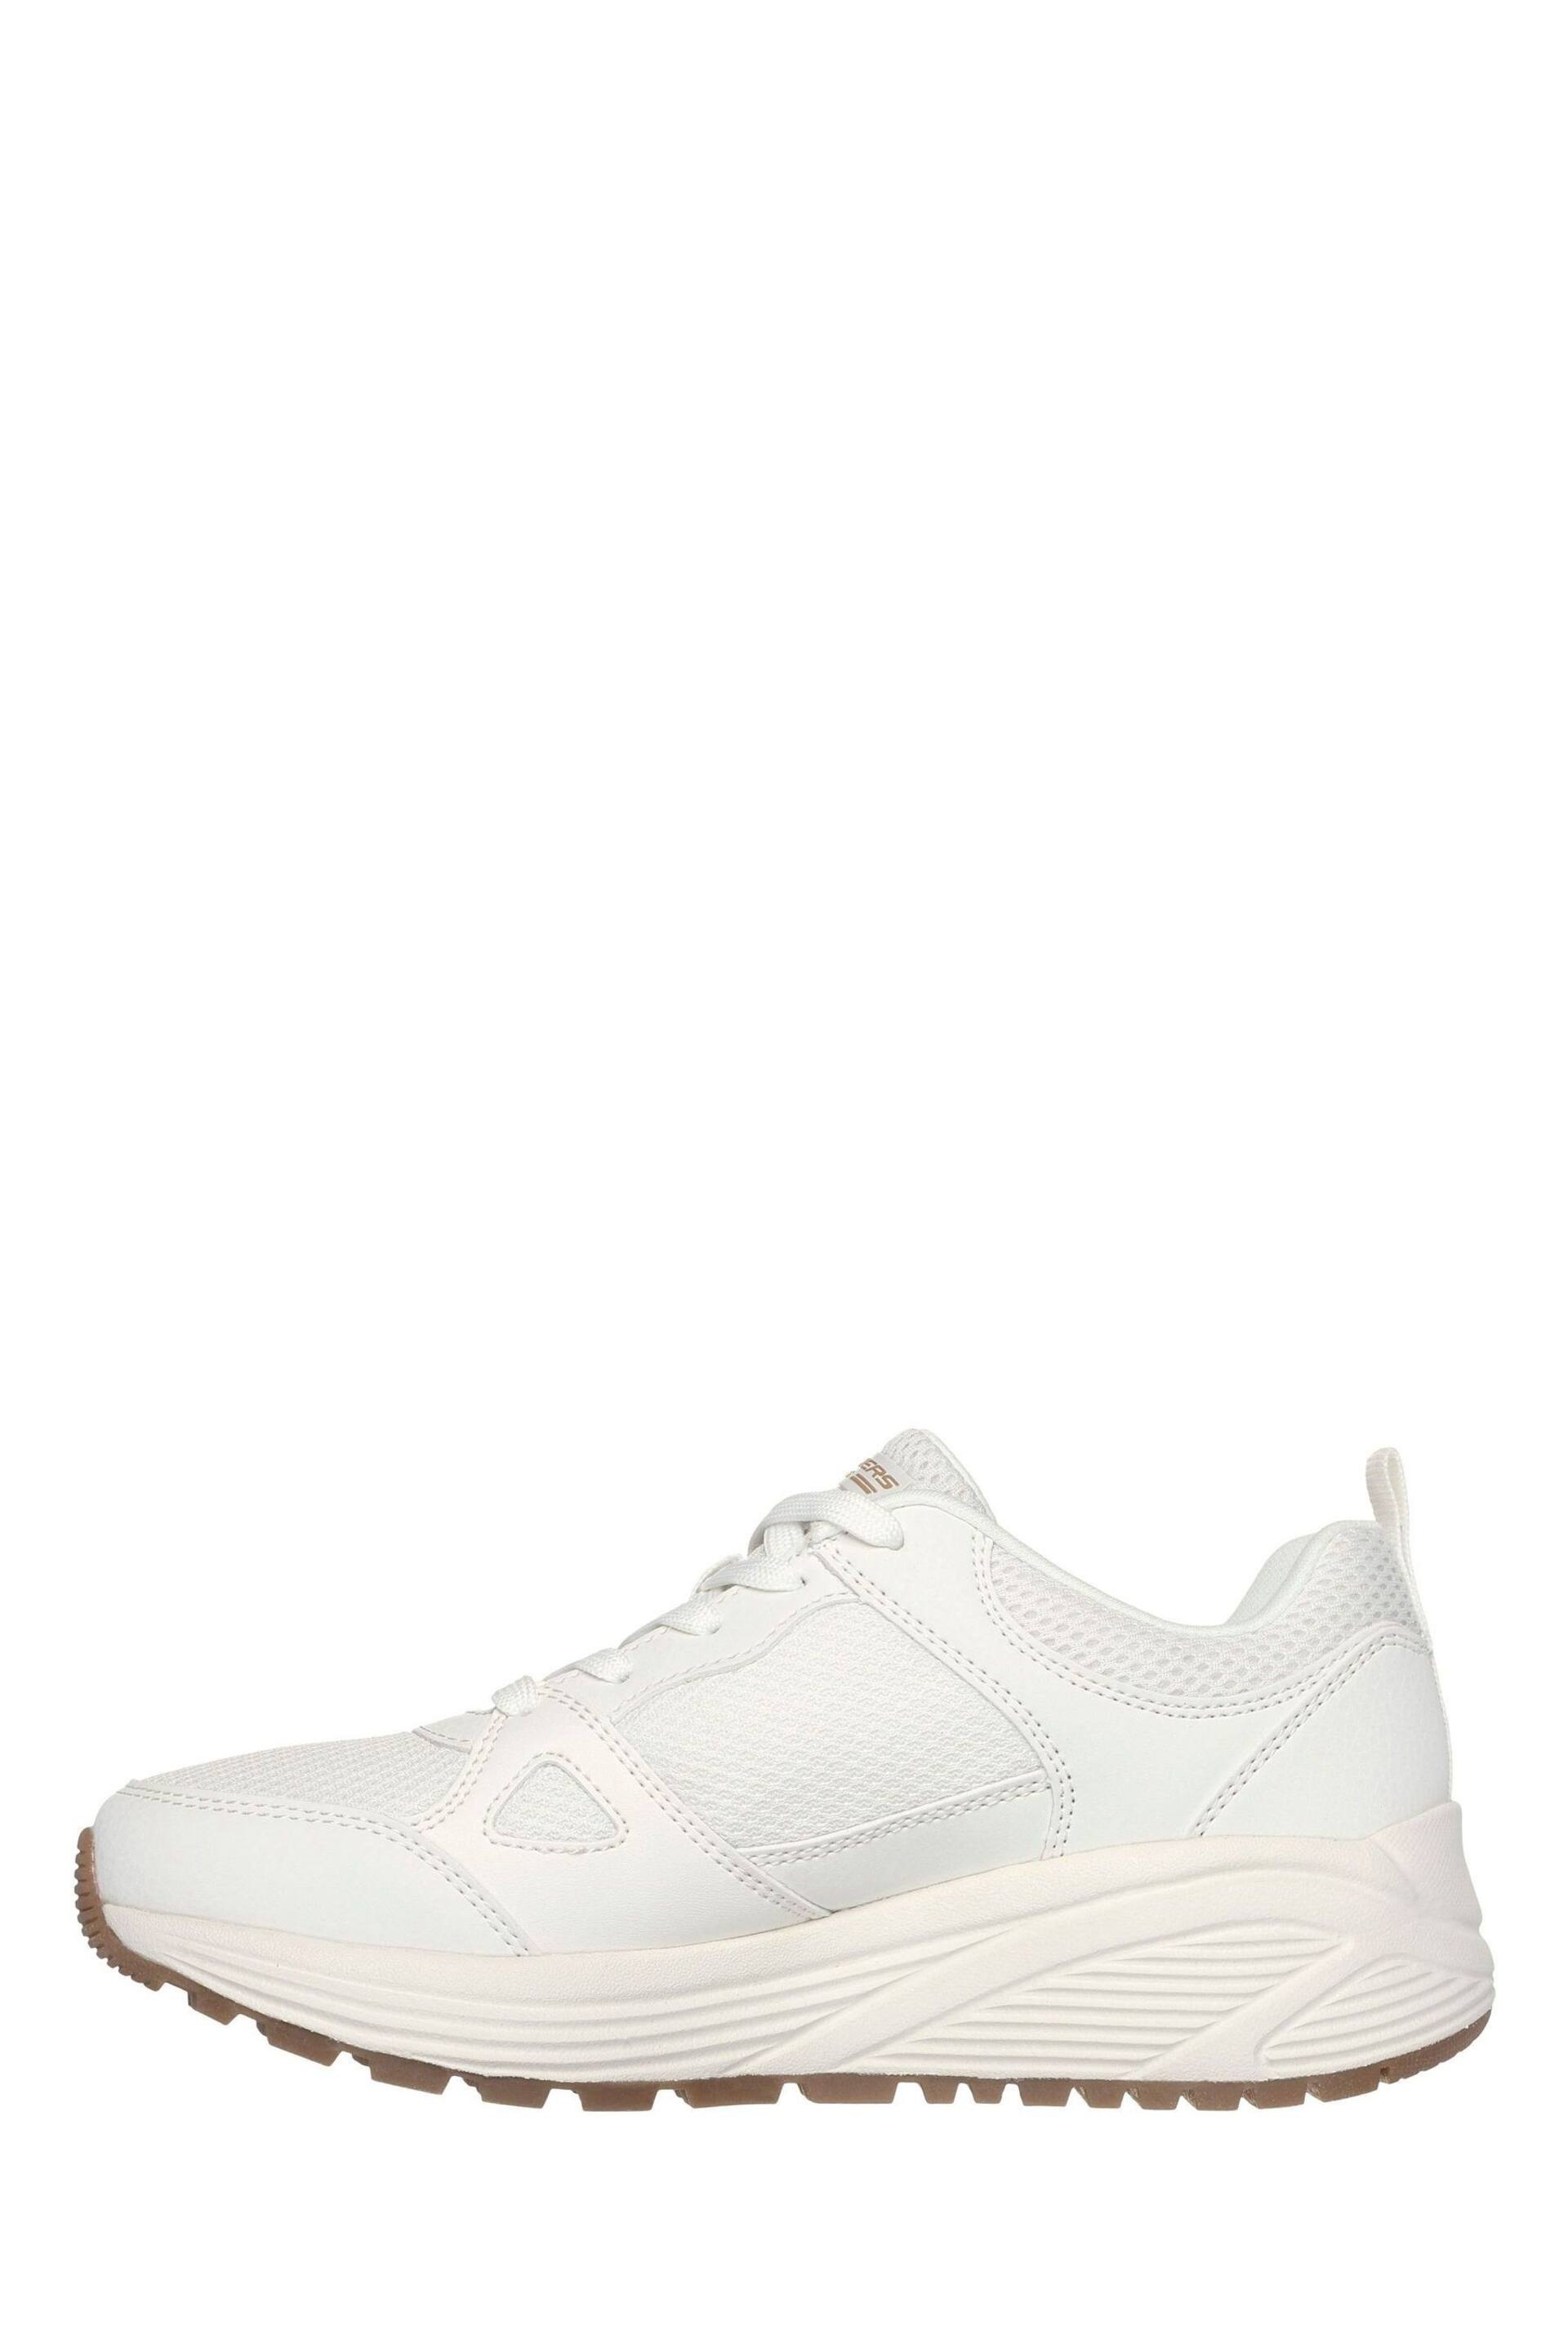 Skechers White Bobs Sparrow 2.0 Trainers - Image 2 of 5